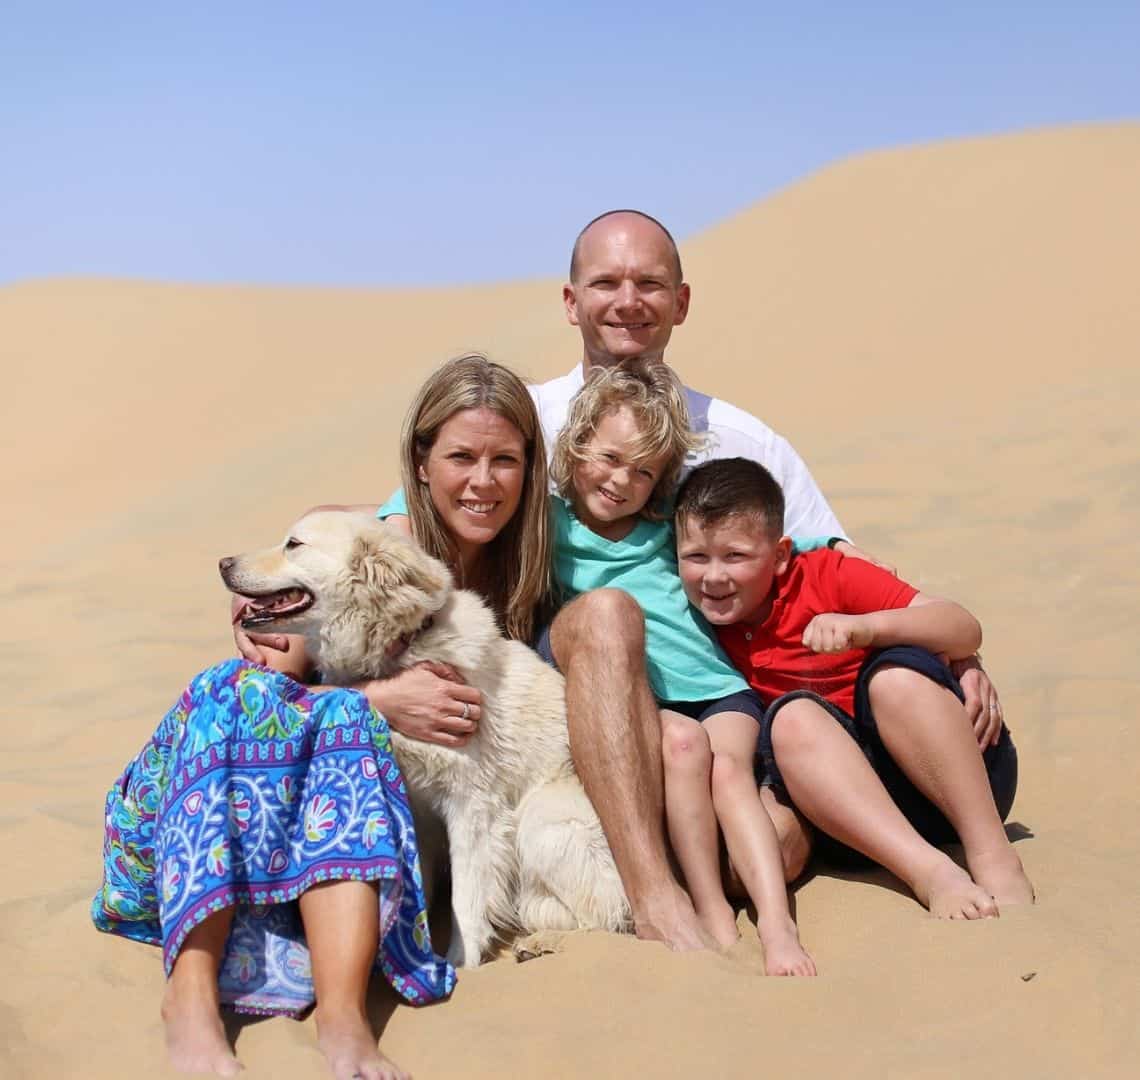 From left to right - me in ablue dress, Doggy Wanderlust (think retriever mongrel), Mr Wanderlust (behind) in a white shirt, Thing 2 on his lap in a turquoise/aqua t-shirt and Thing 1 in a red polo next to them. We are sat on a yellow sand dune and the sky is bright blue. 